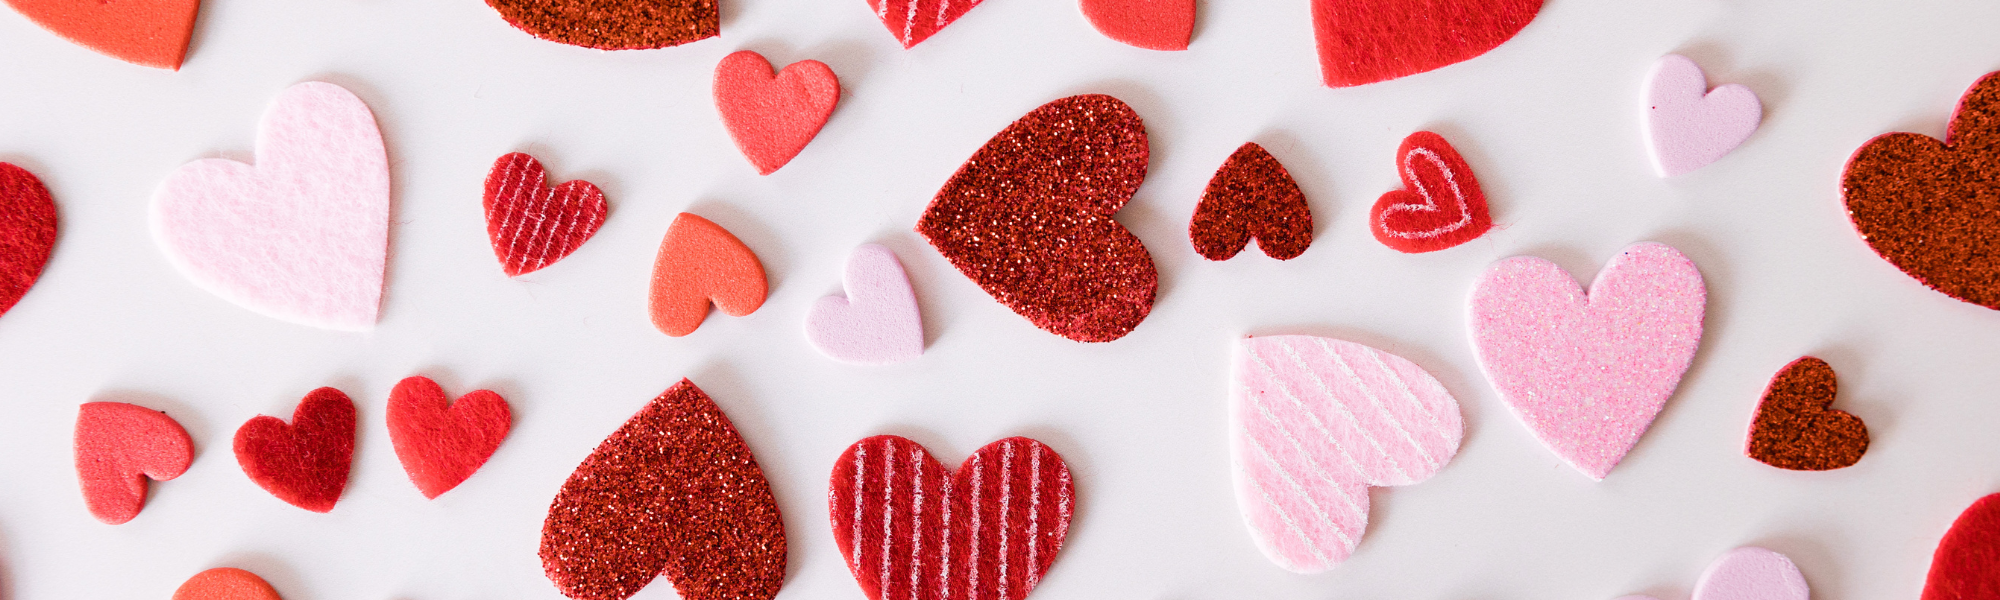 Spreading More Love: The Best Unconventional Valentine’s Day Ideas